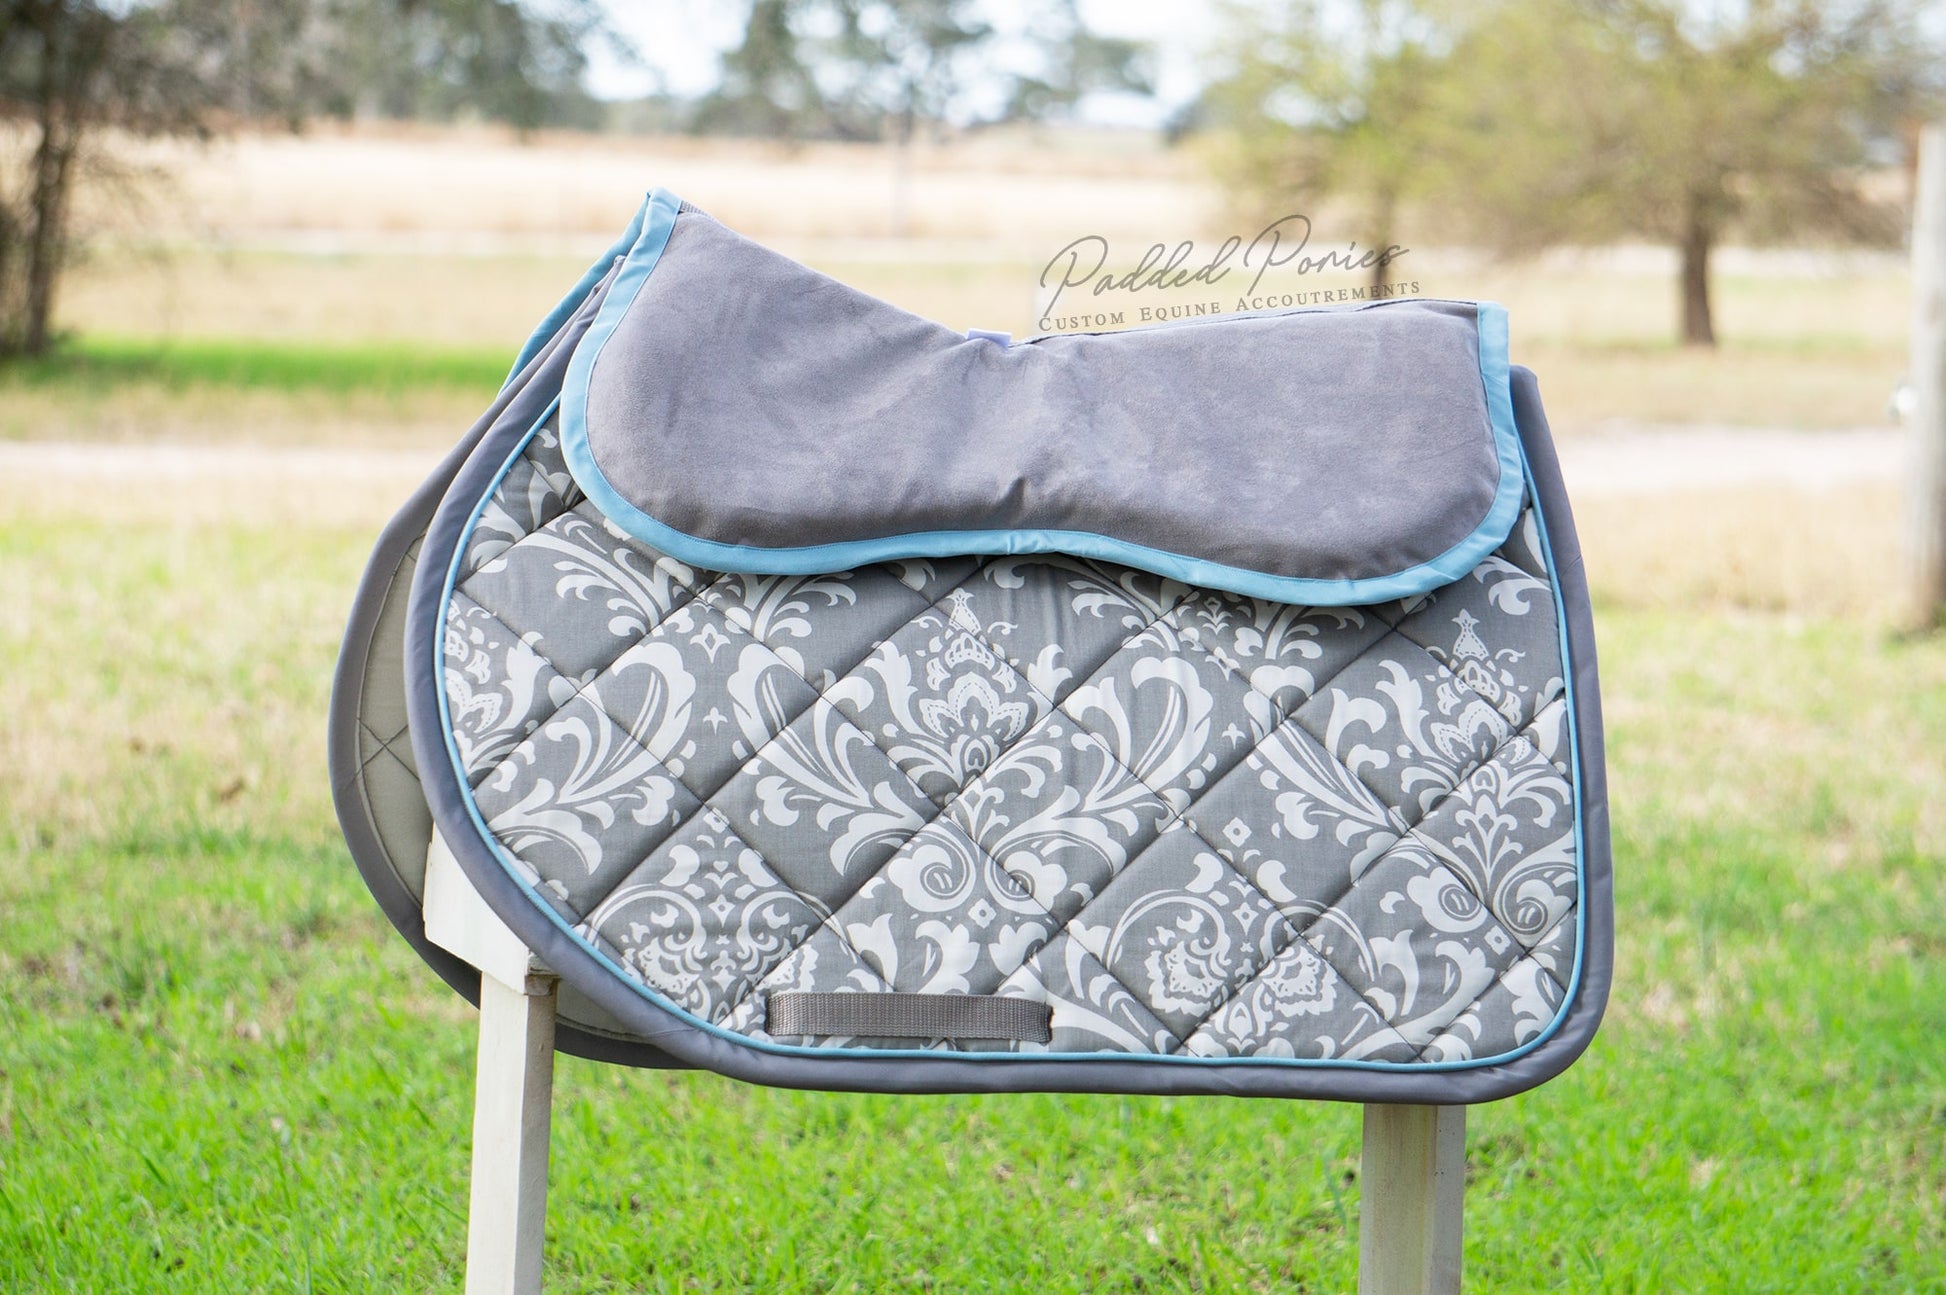 Silver and Baby Blue Suede Comfort Memory Foam Jump Half Pad with Matching Damask Print Saddle Pad